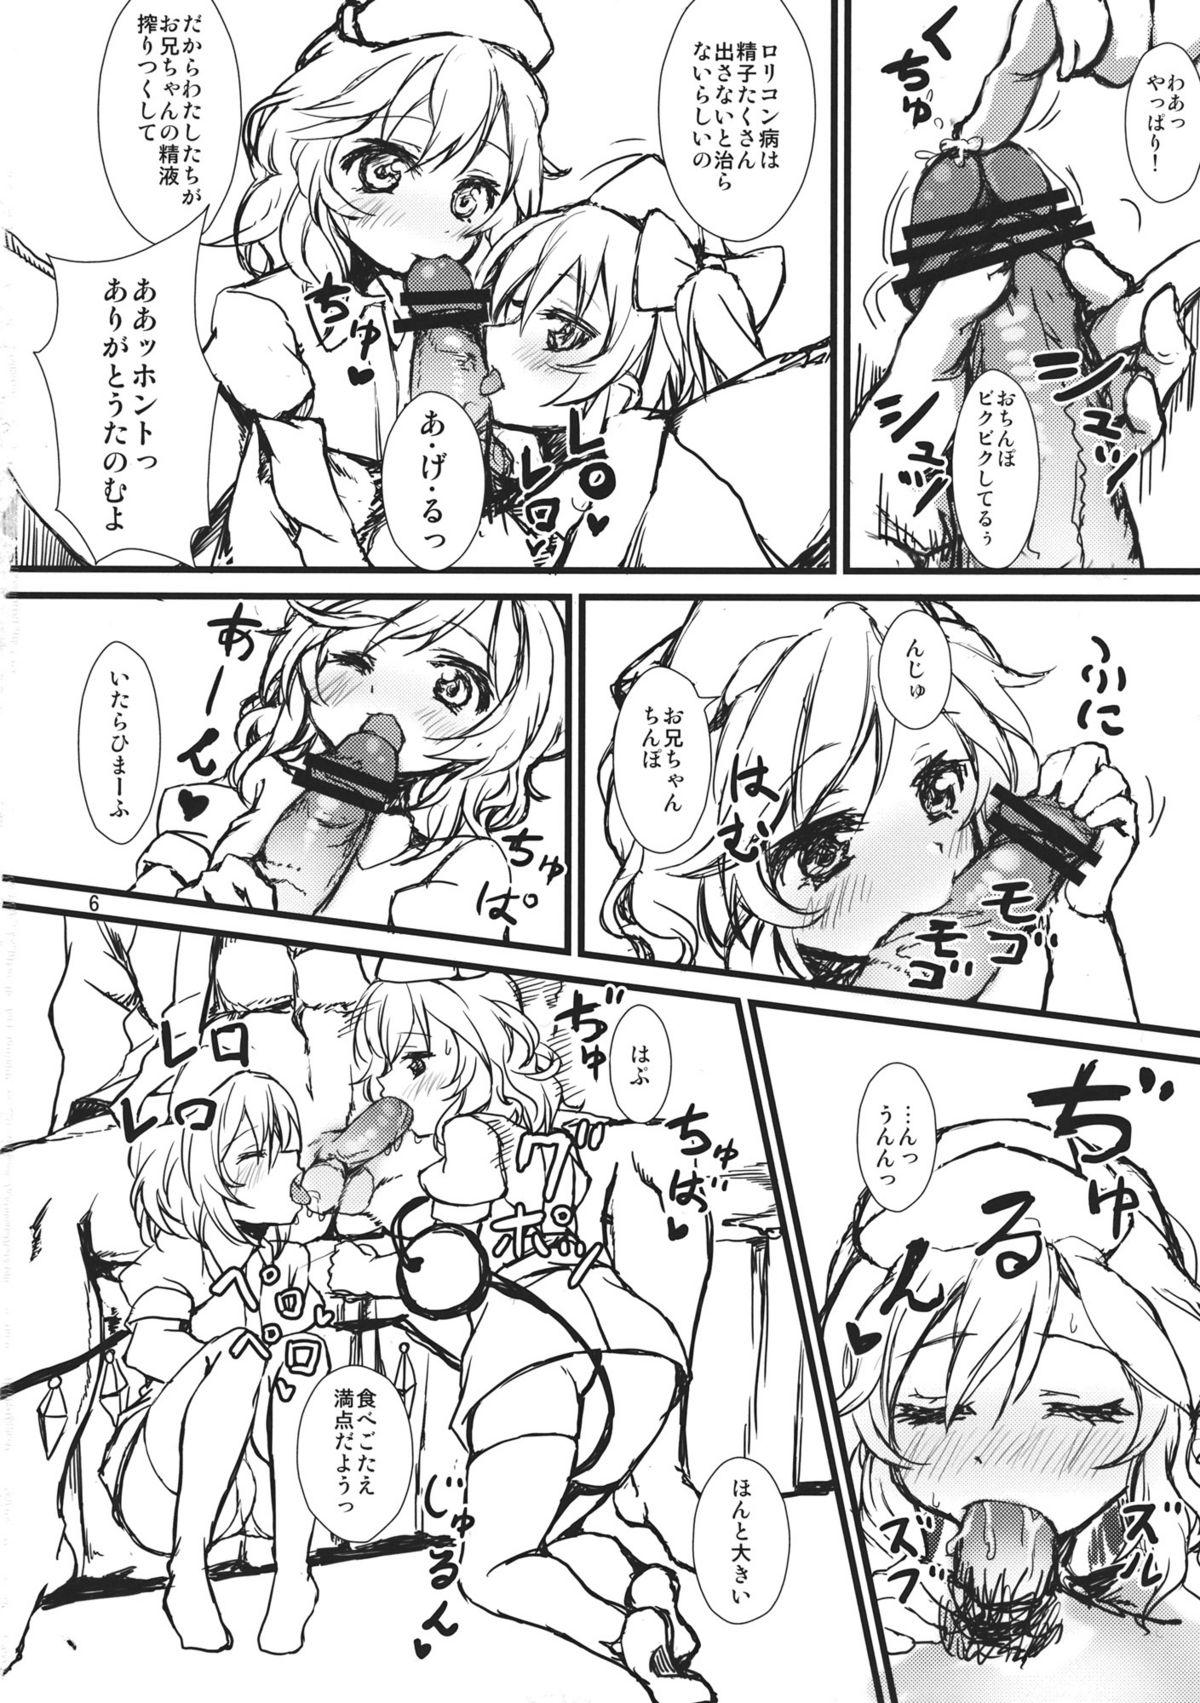 Big Ass Toy Destroyer - Touhou project Cumming - Page 6